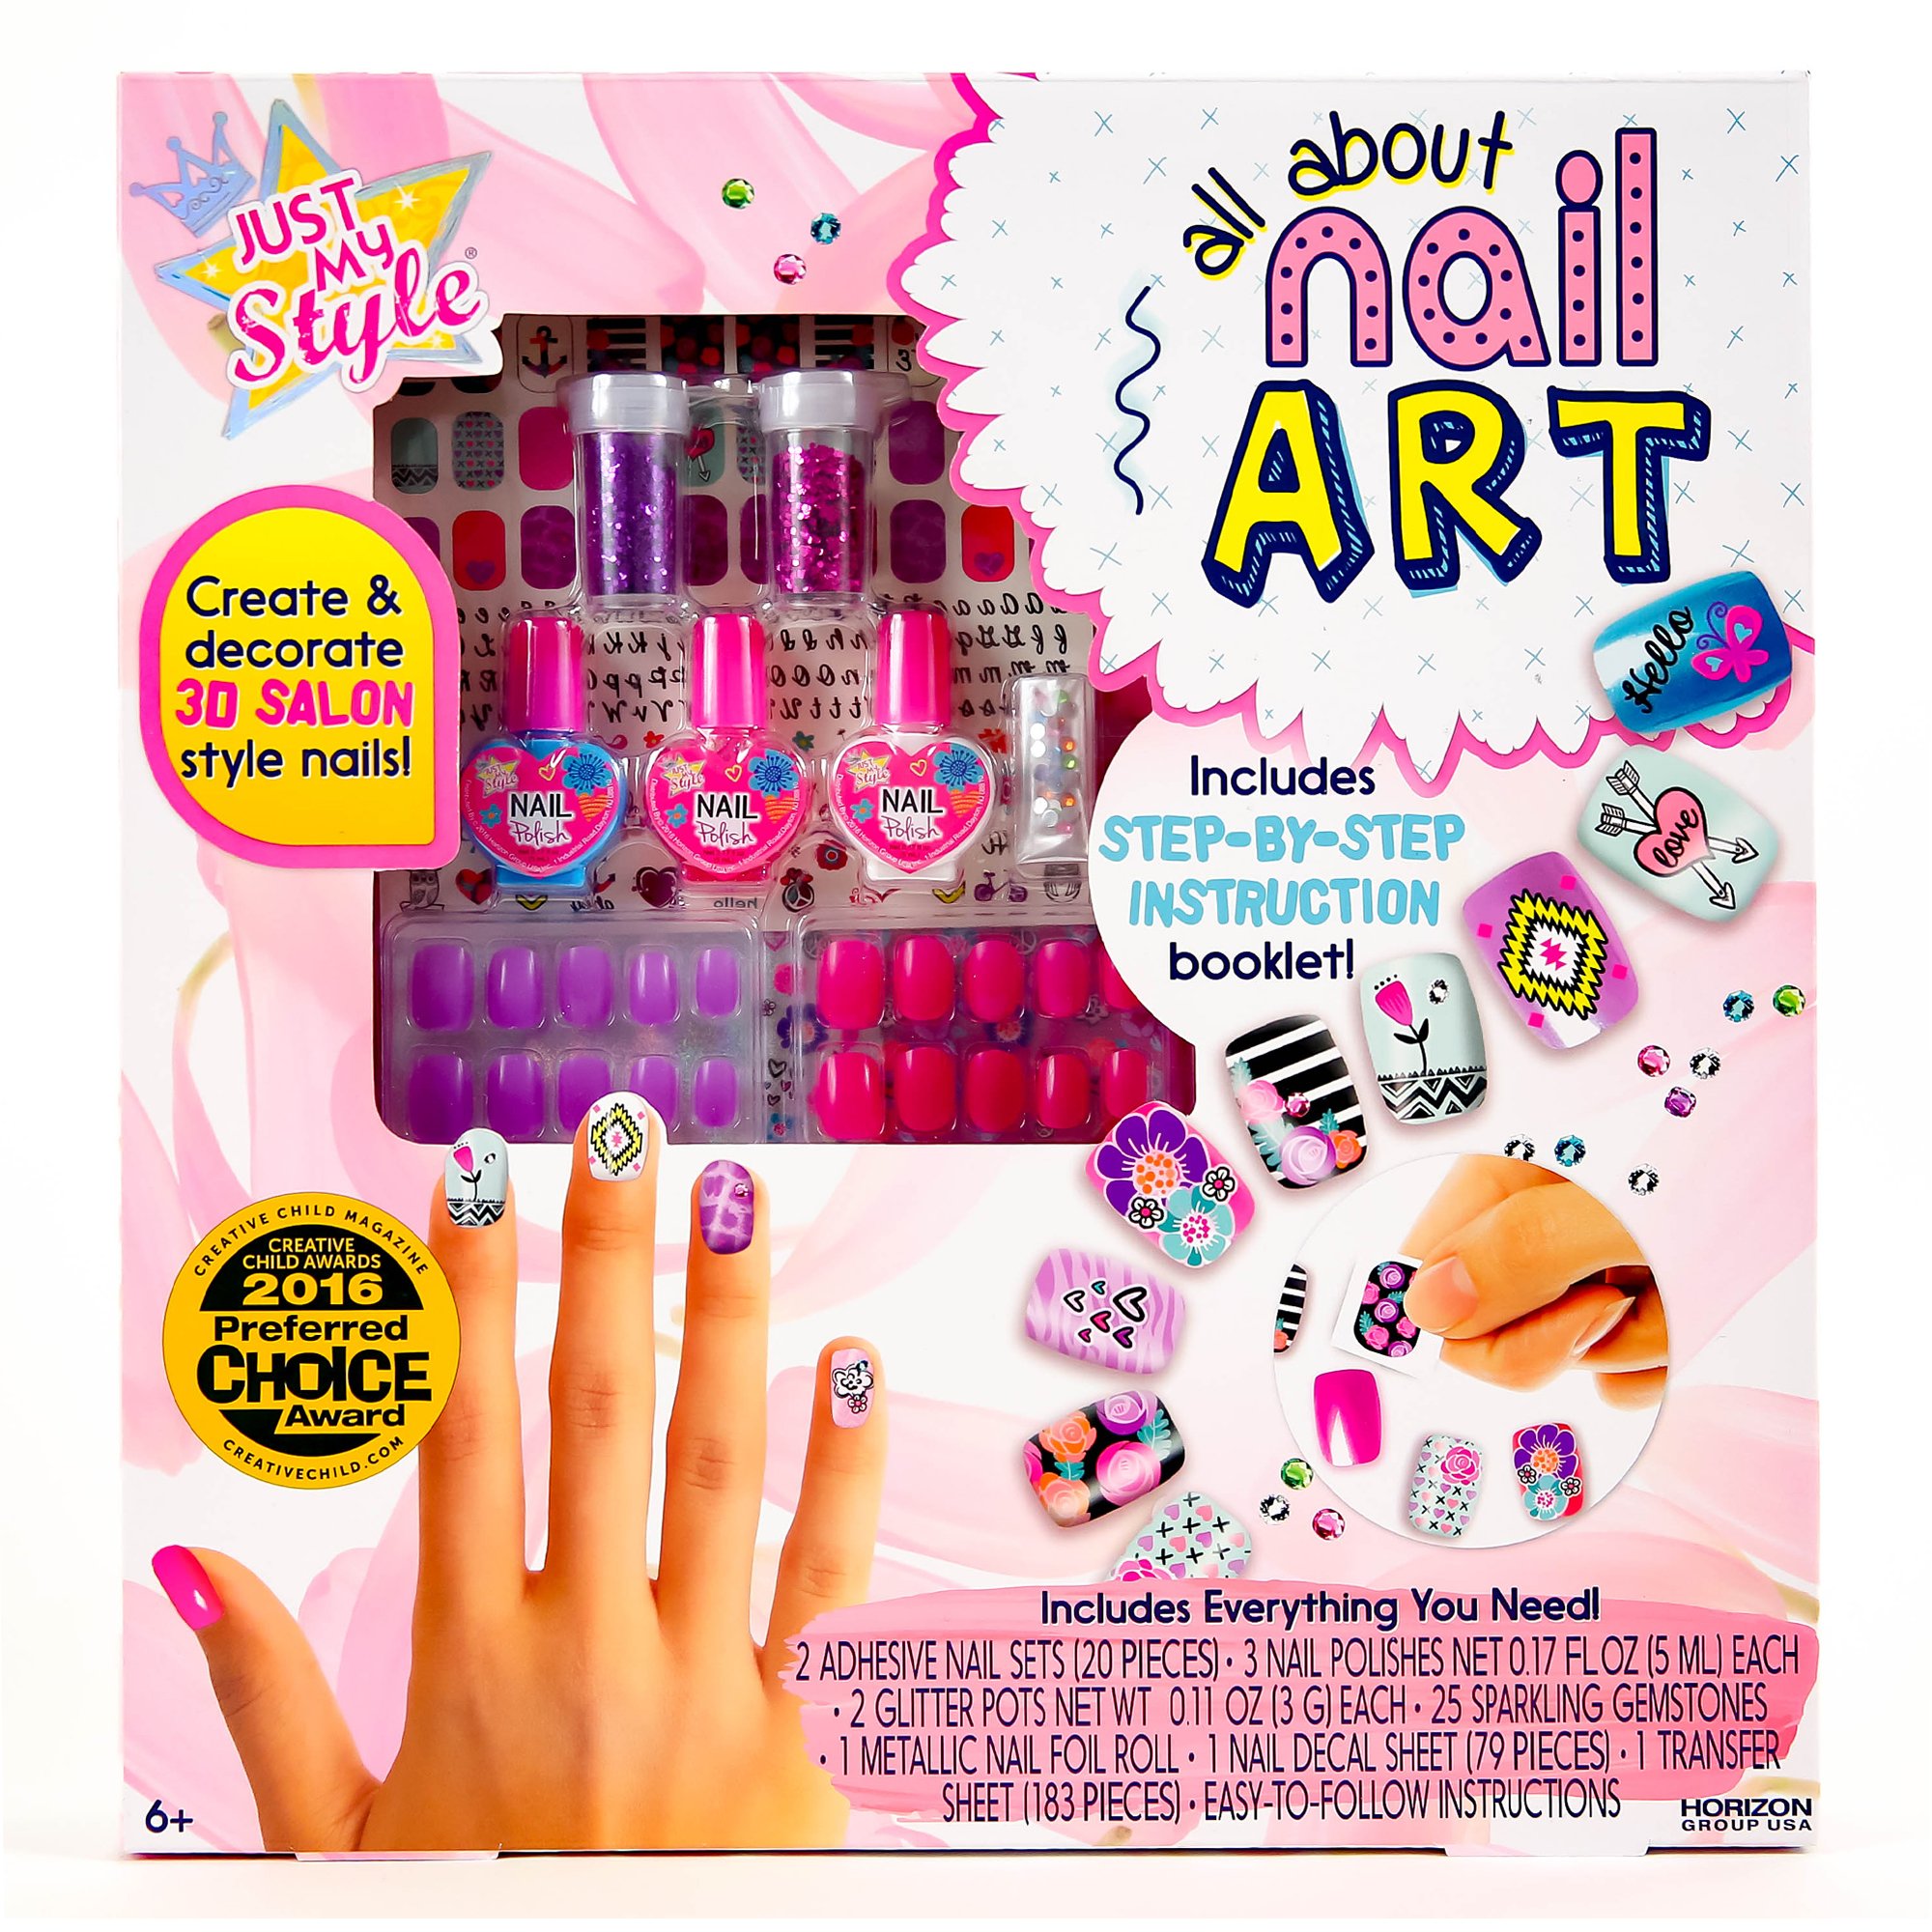 Just My Style All about Nail Art by Horizon Group USA